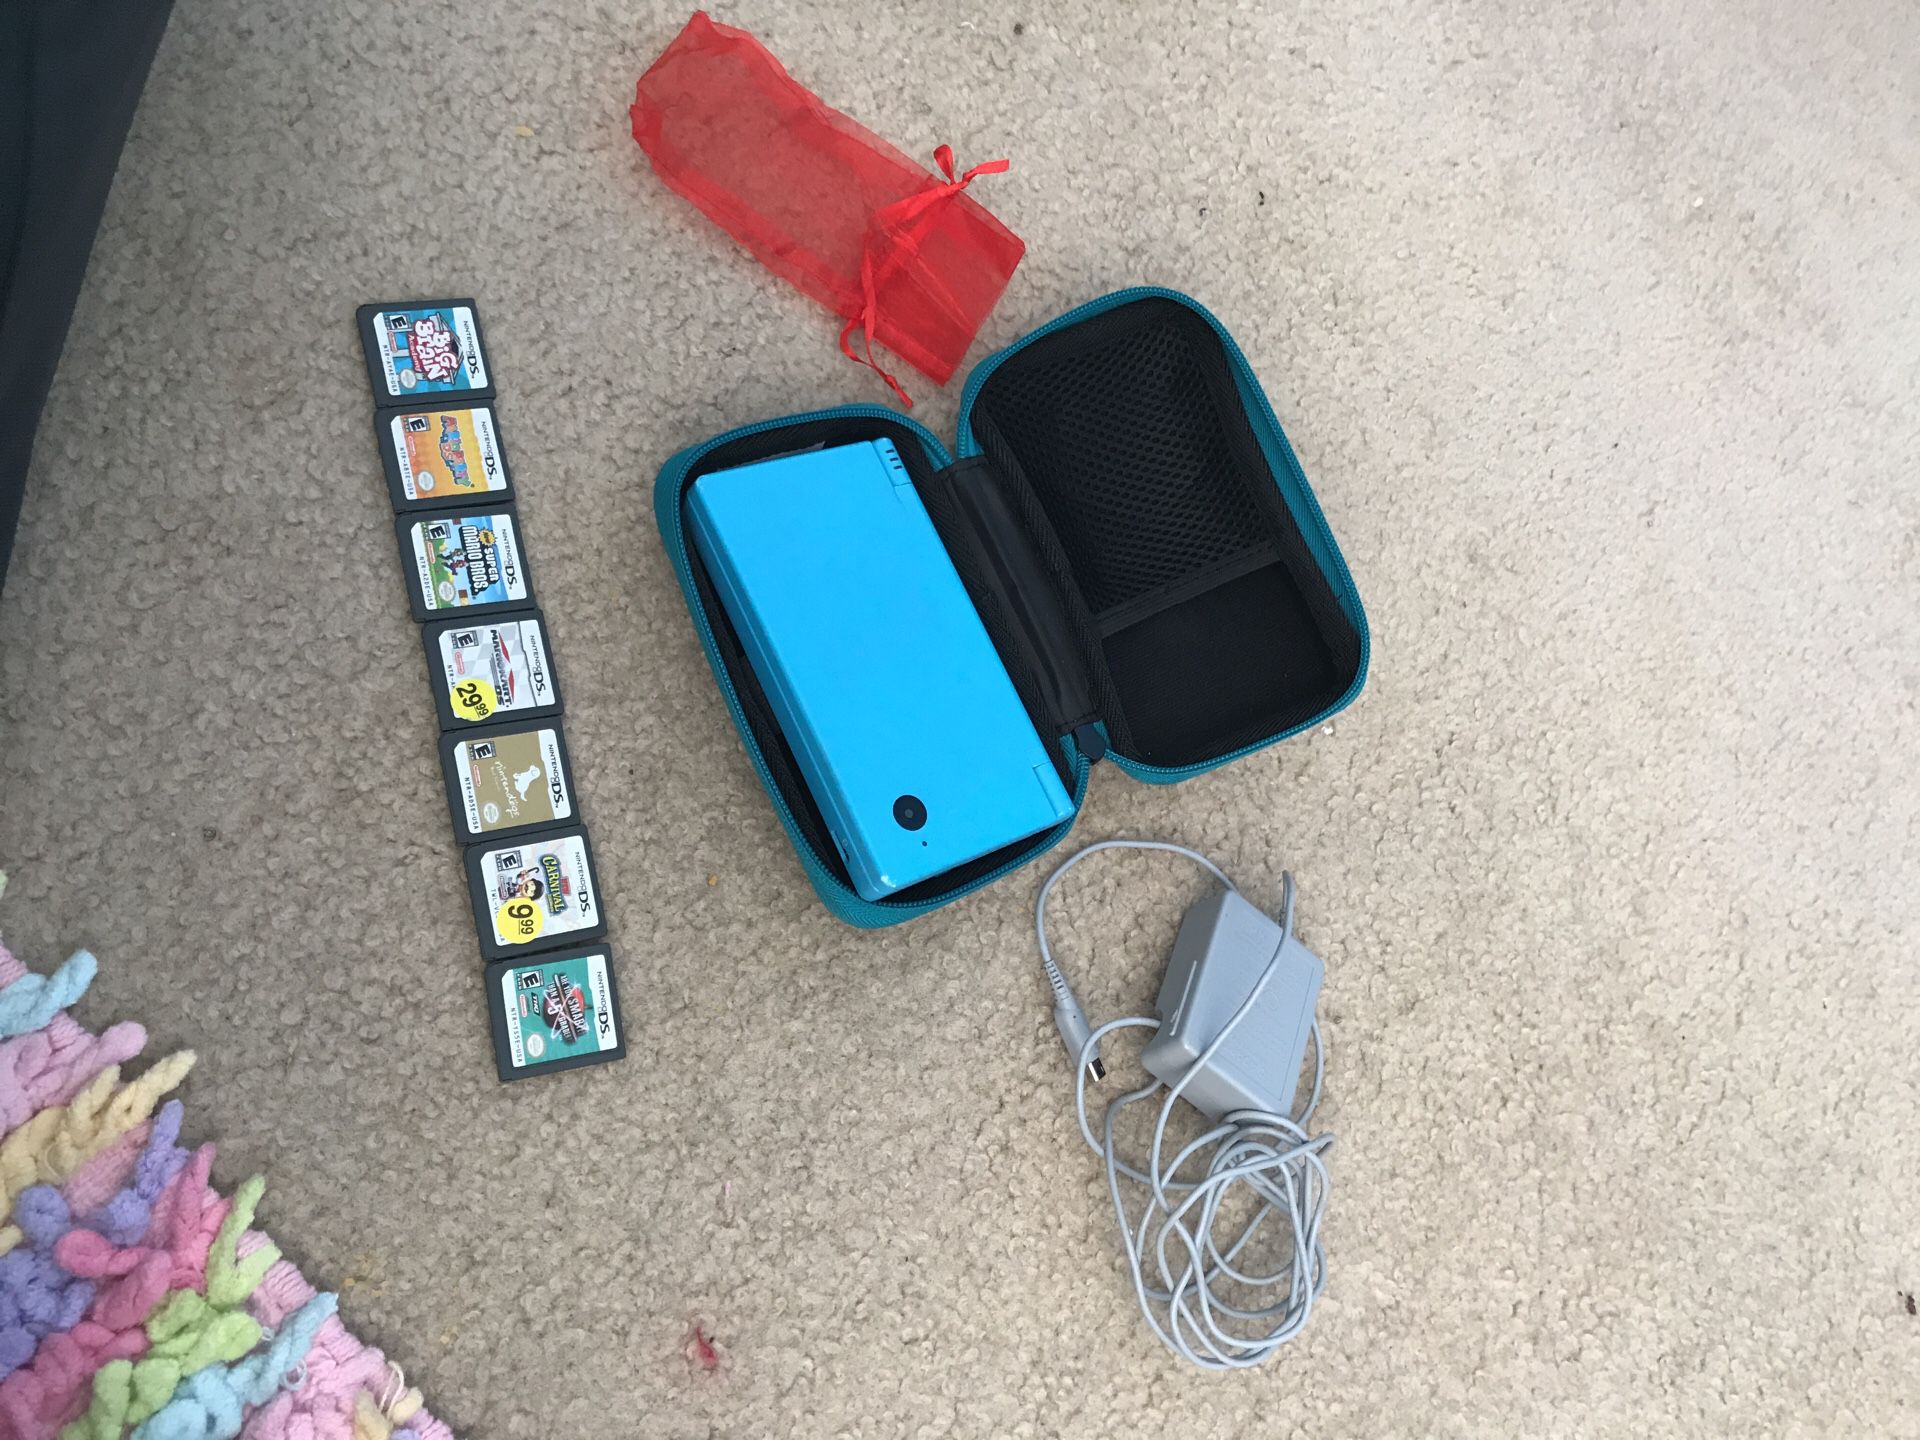 Nintendo Dsi comes with case & 7 games